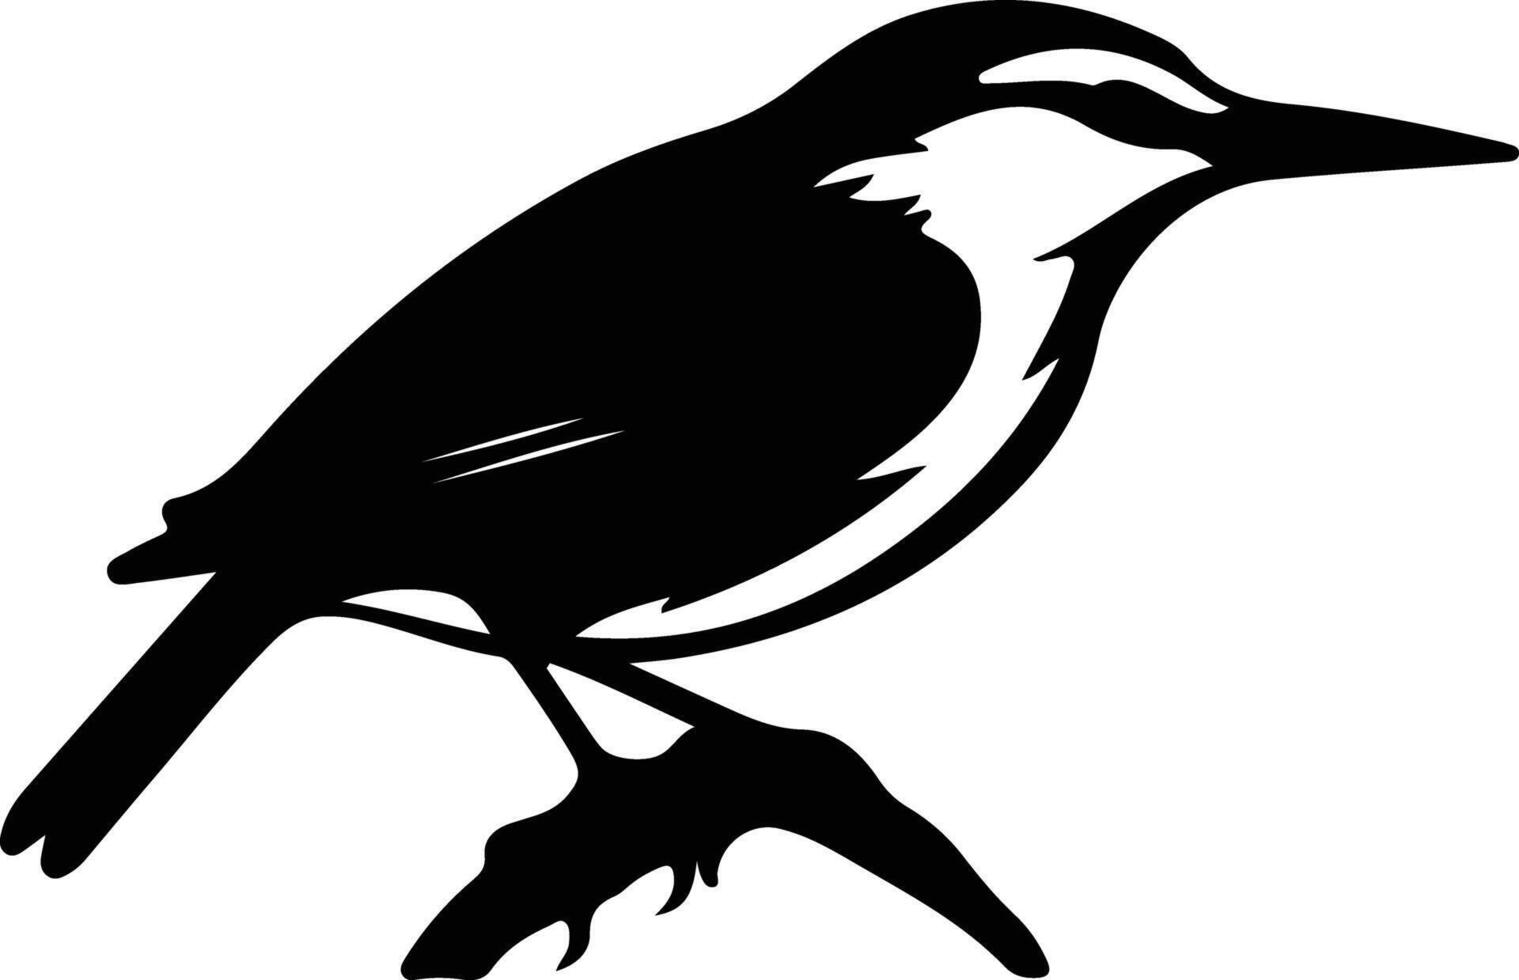 nuthatch black silhouette vector